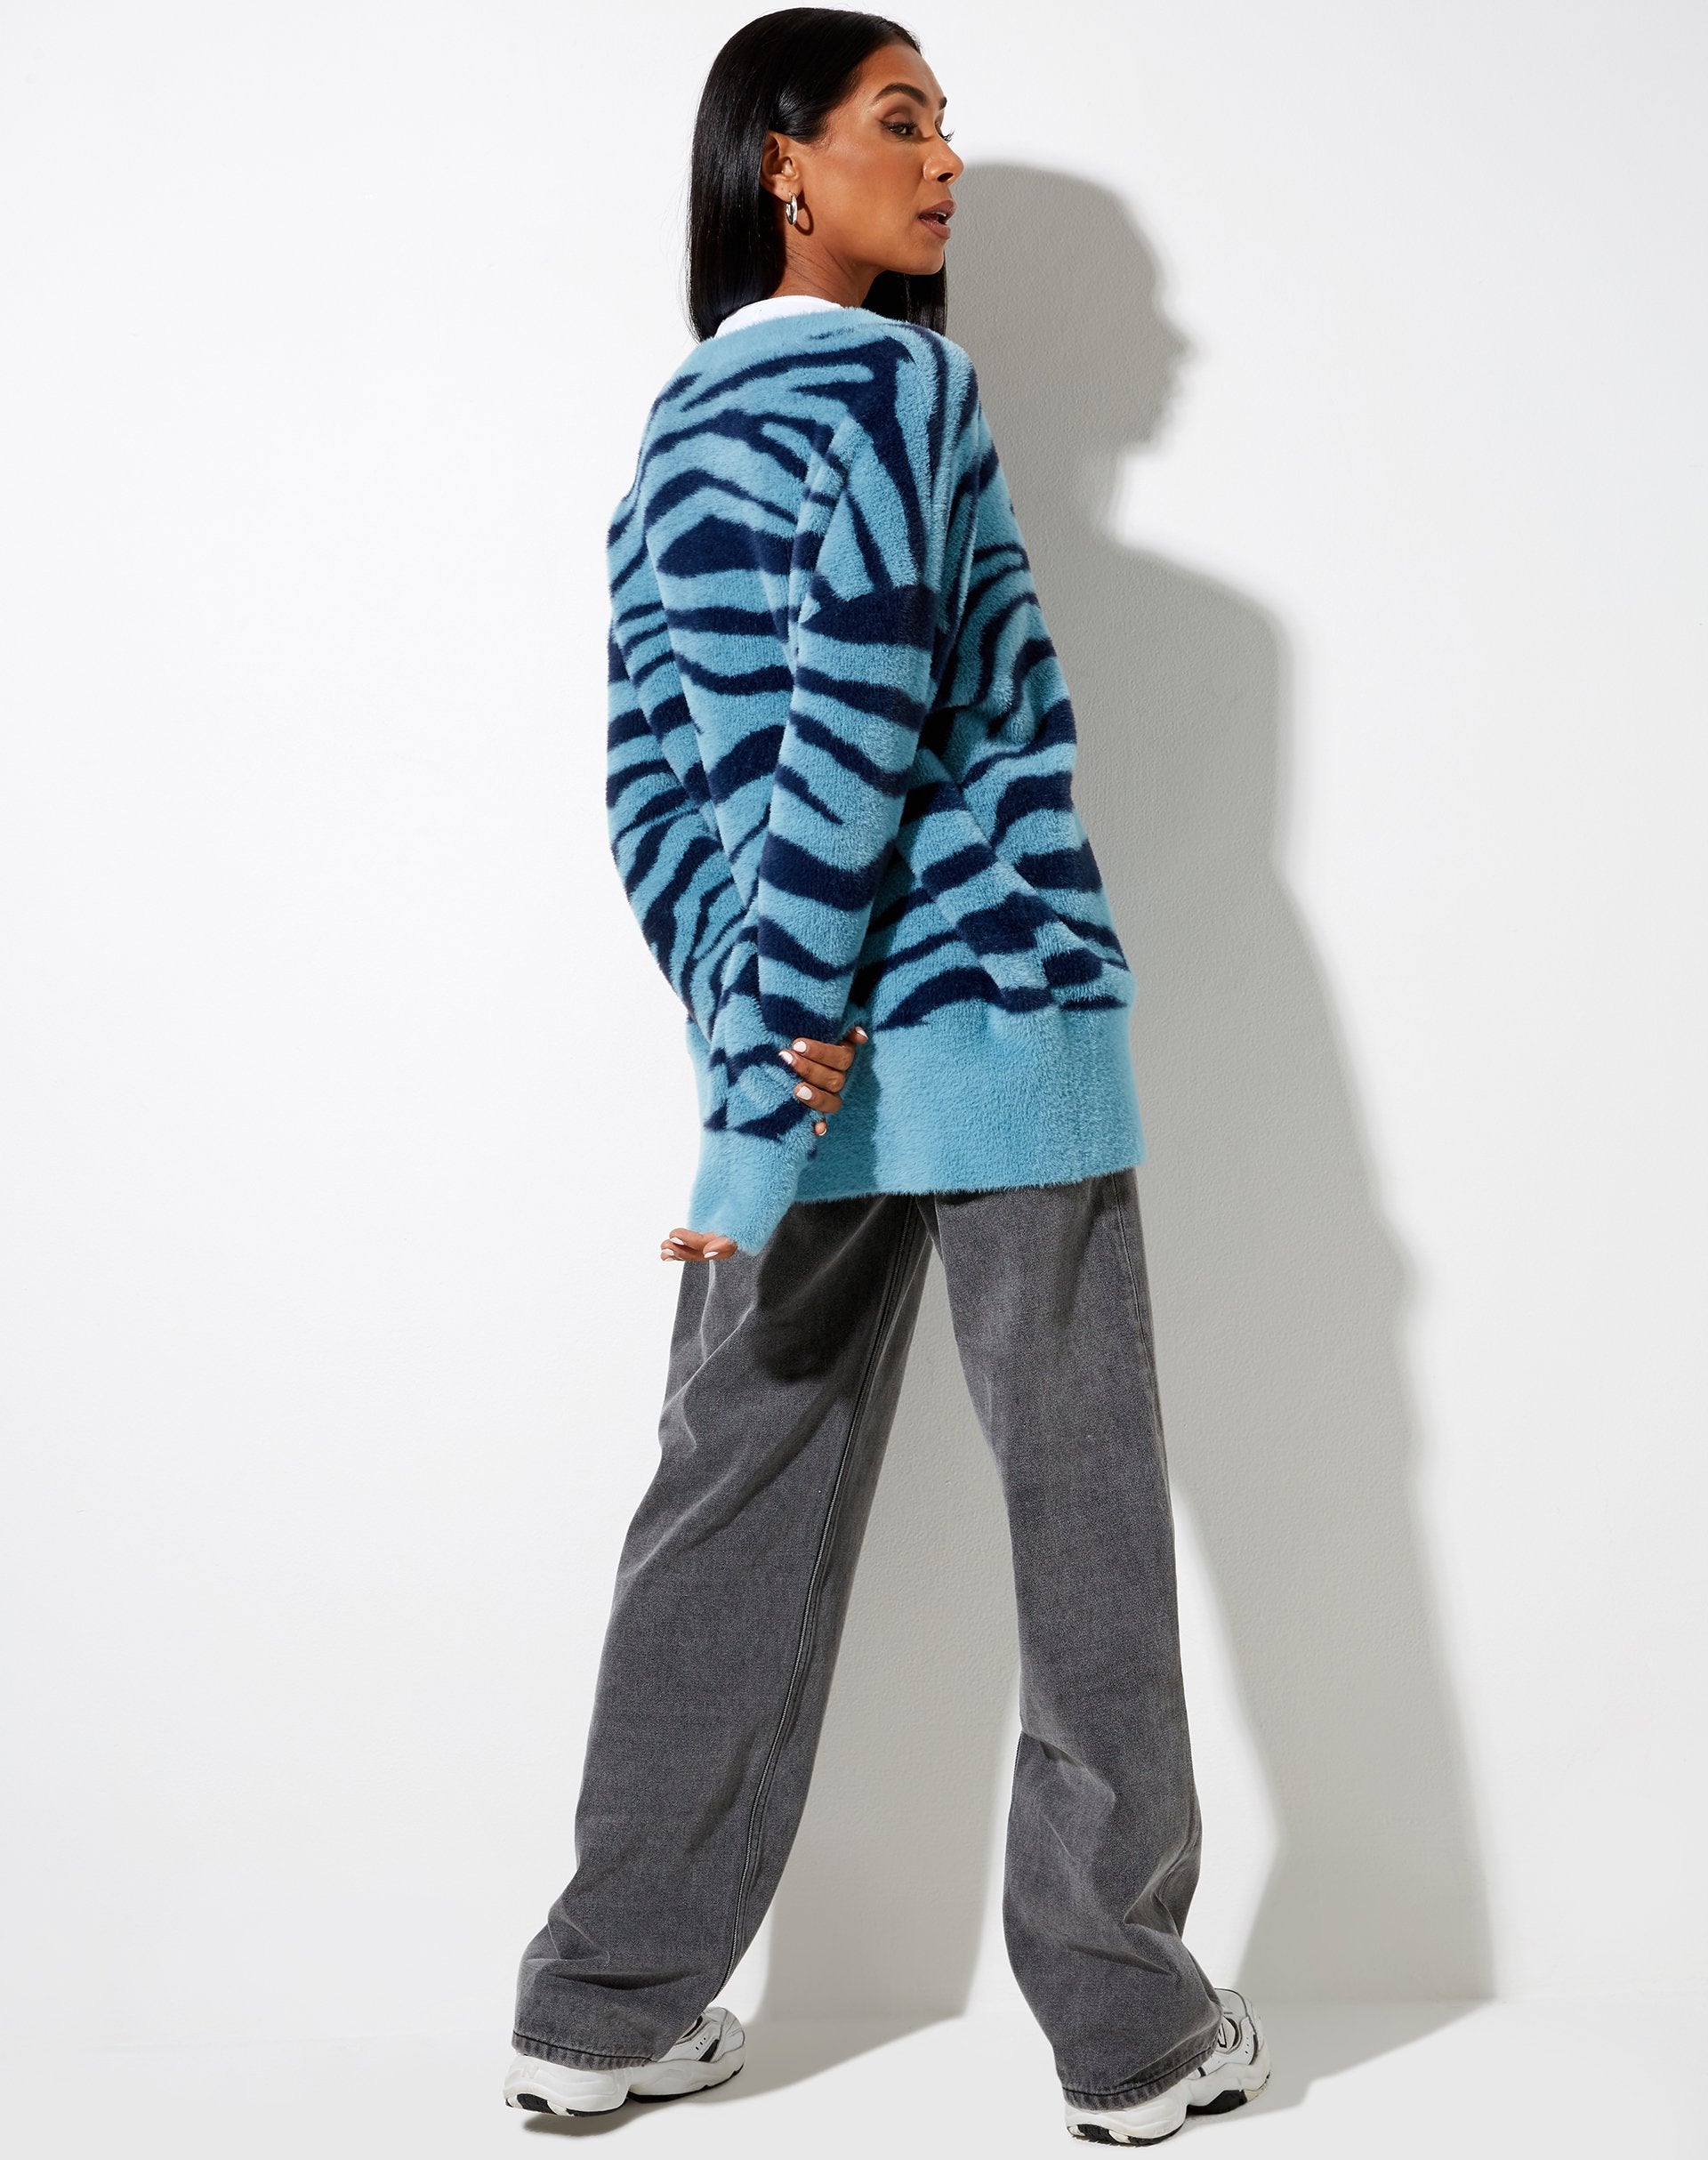 Image of Uriela Cardi in Knit Zebra Blue and Navy